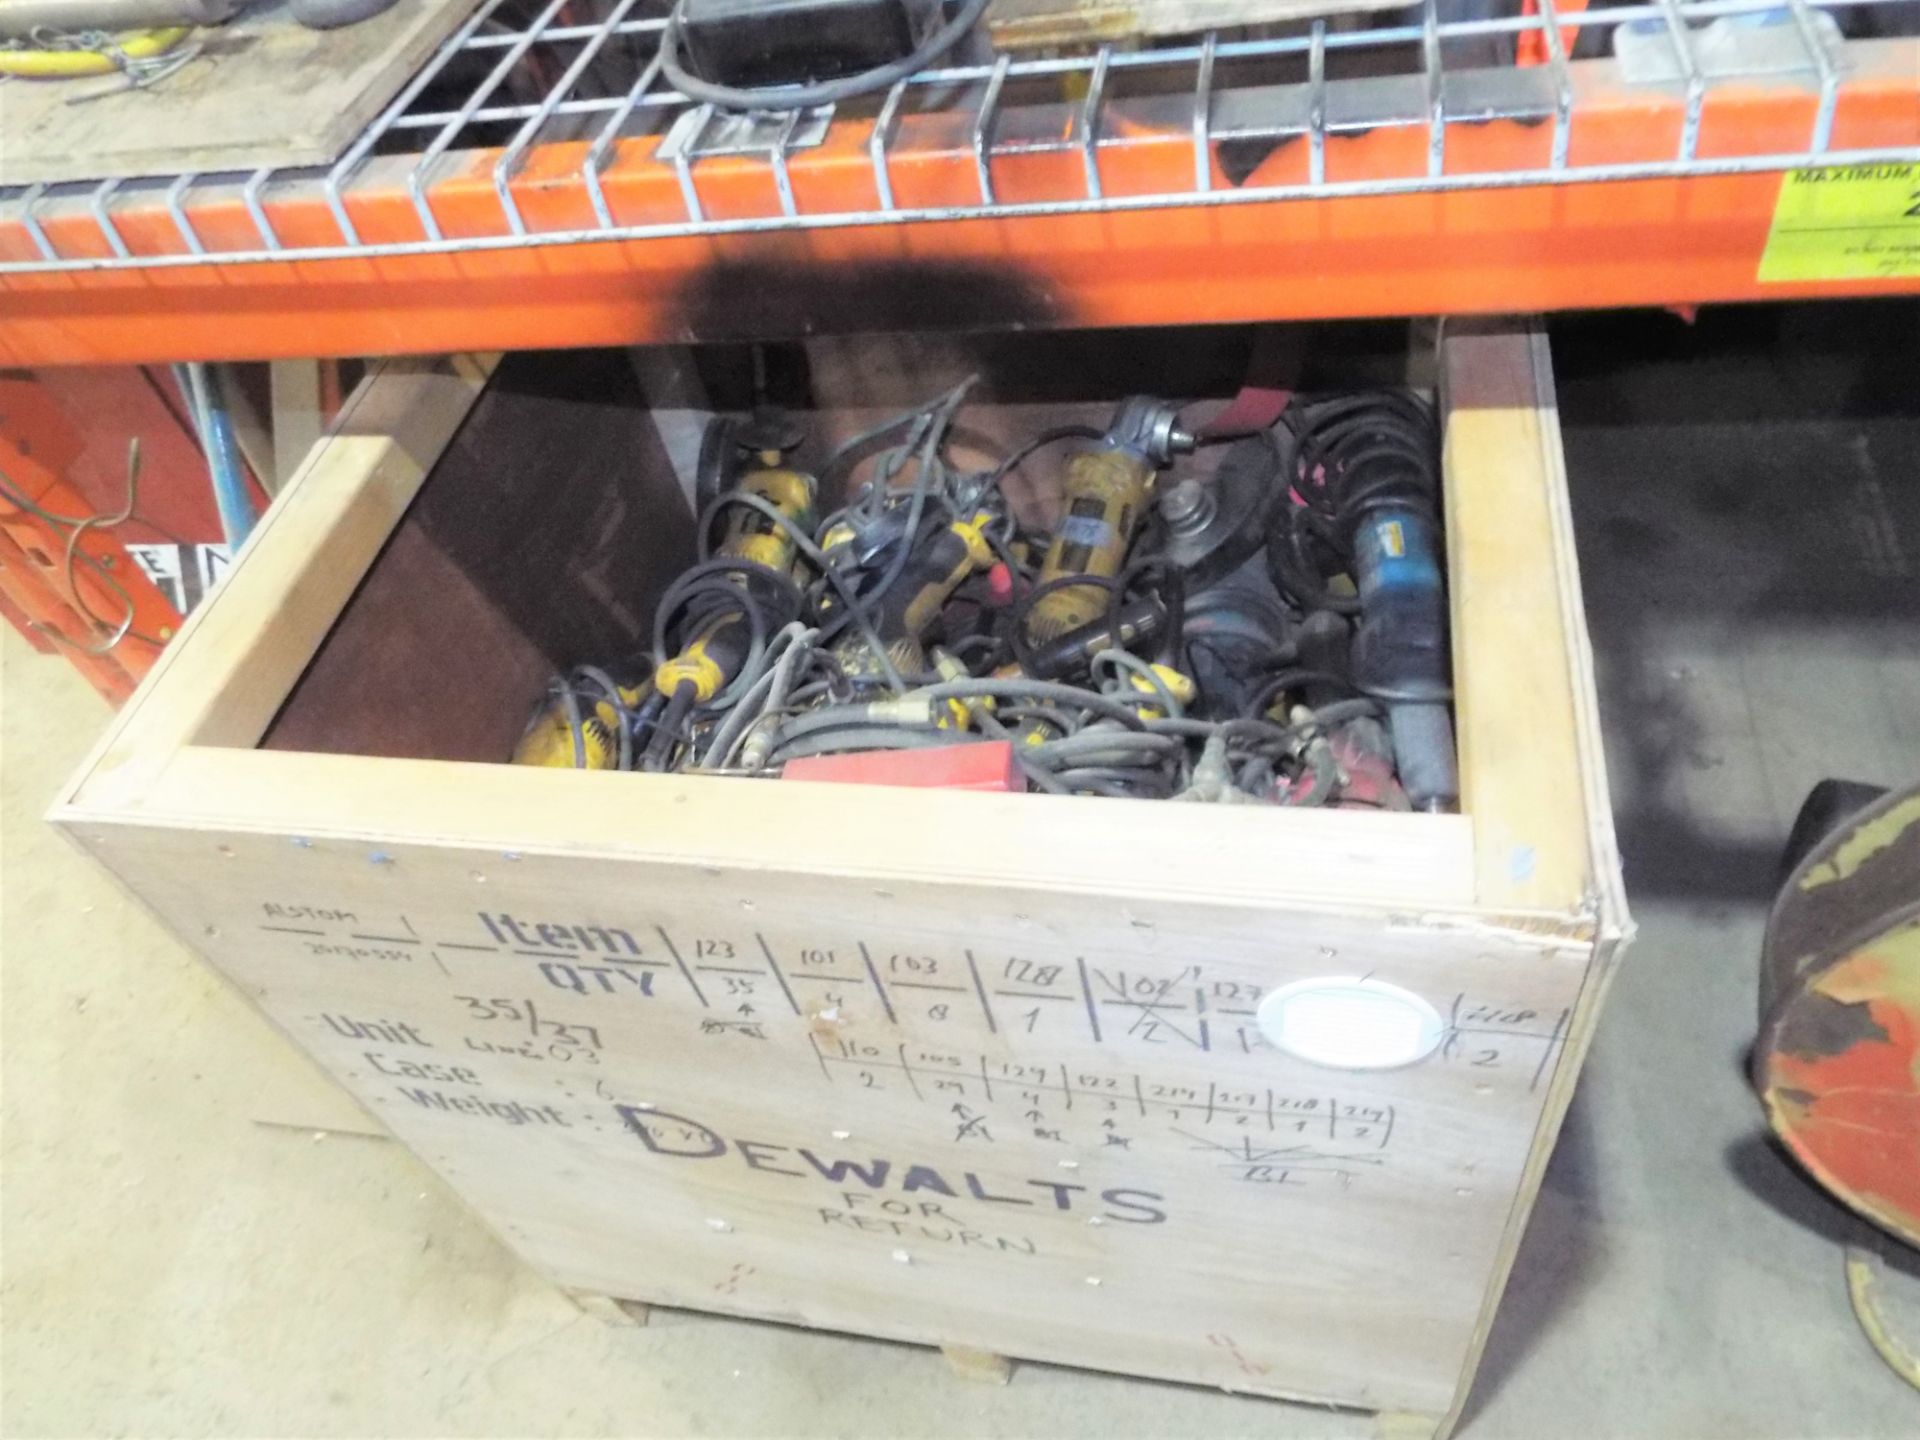 LOT/ CONTENTS OF RACK INCLUDING STRAPPING CADDY, OXY-ACET HOSE, AND DEWALT GRINDERS - Image 3 of 5